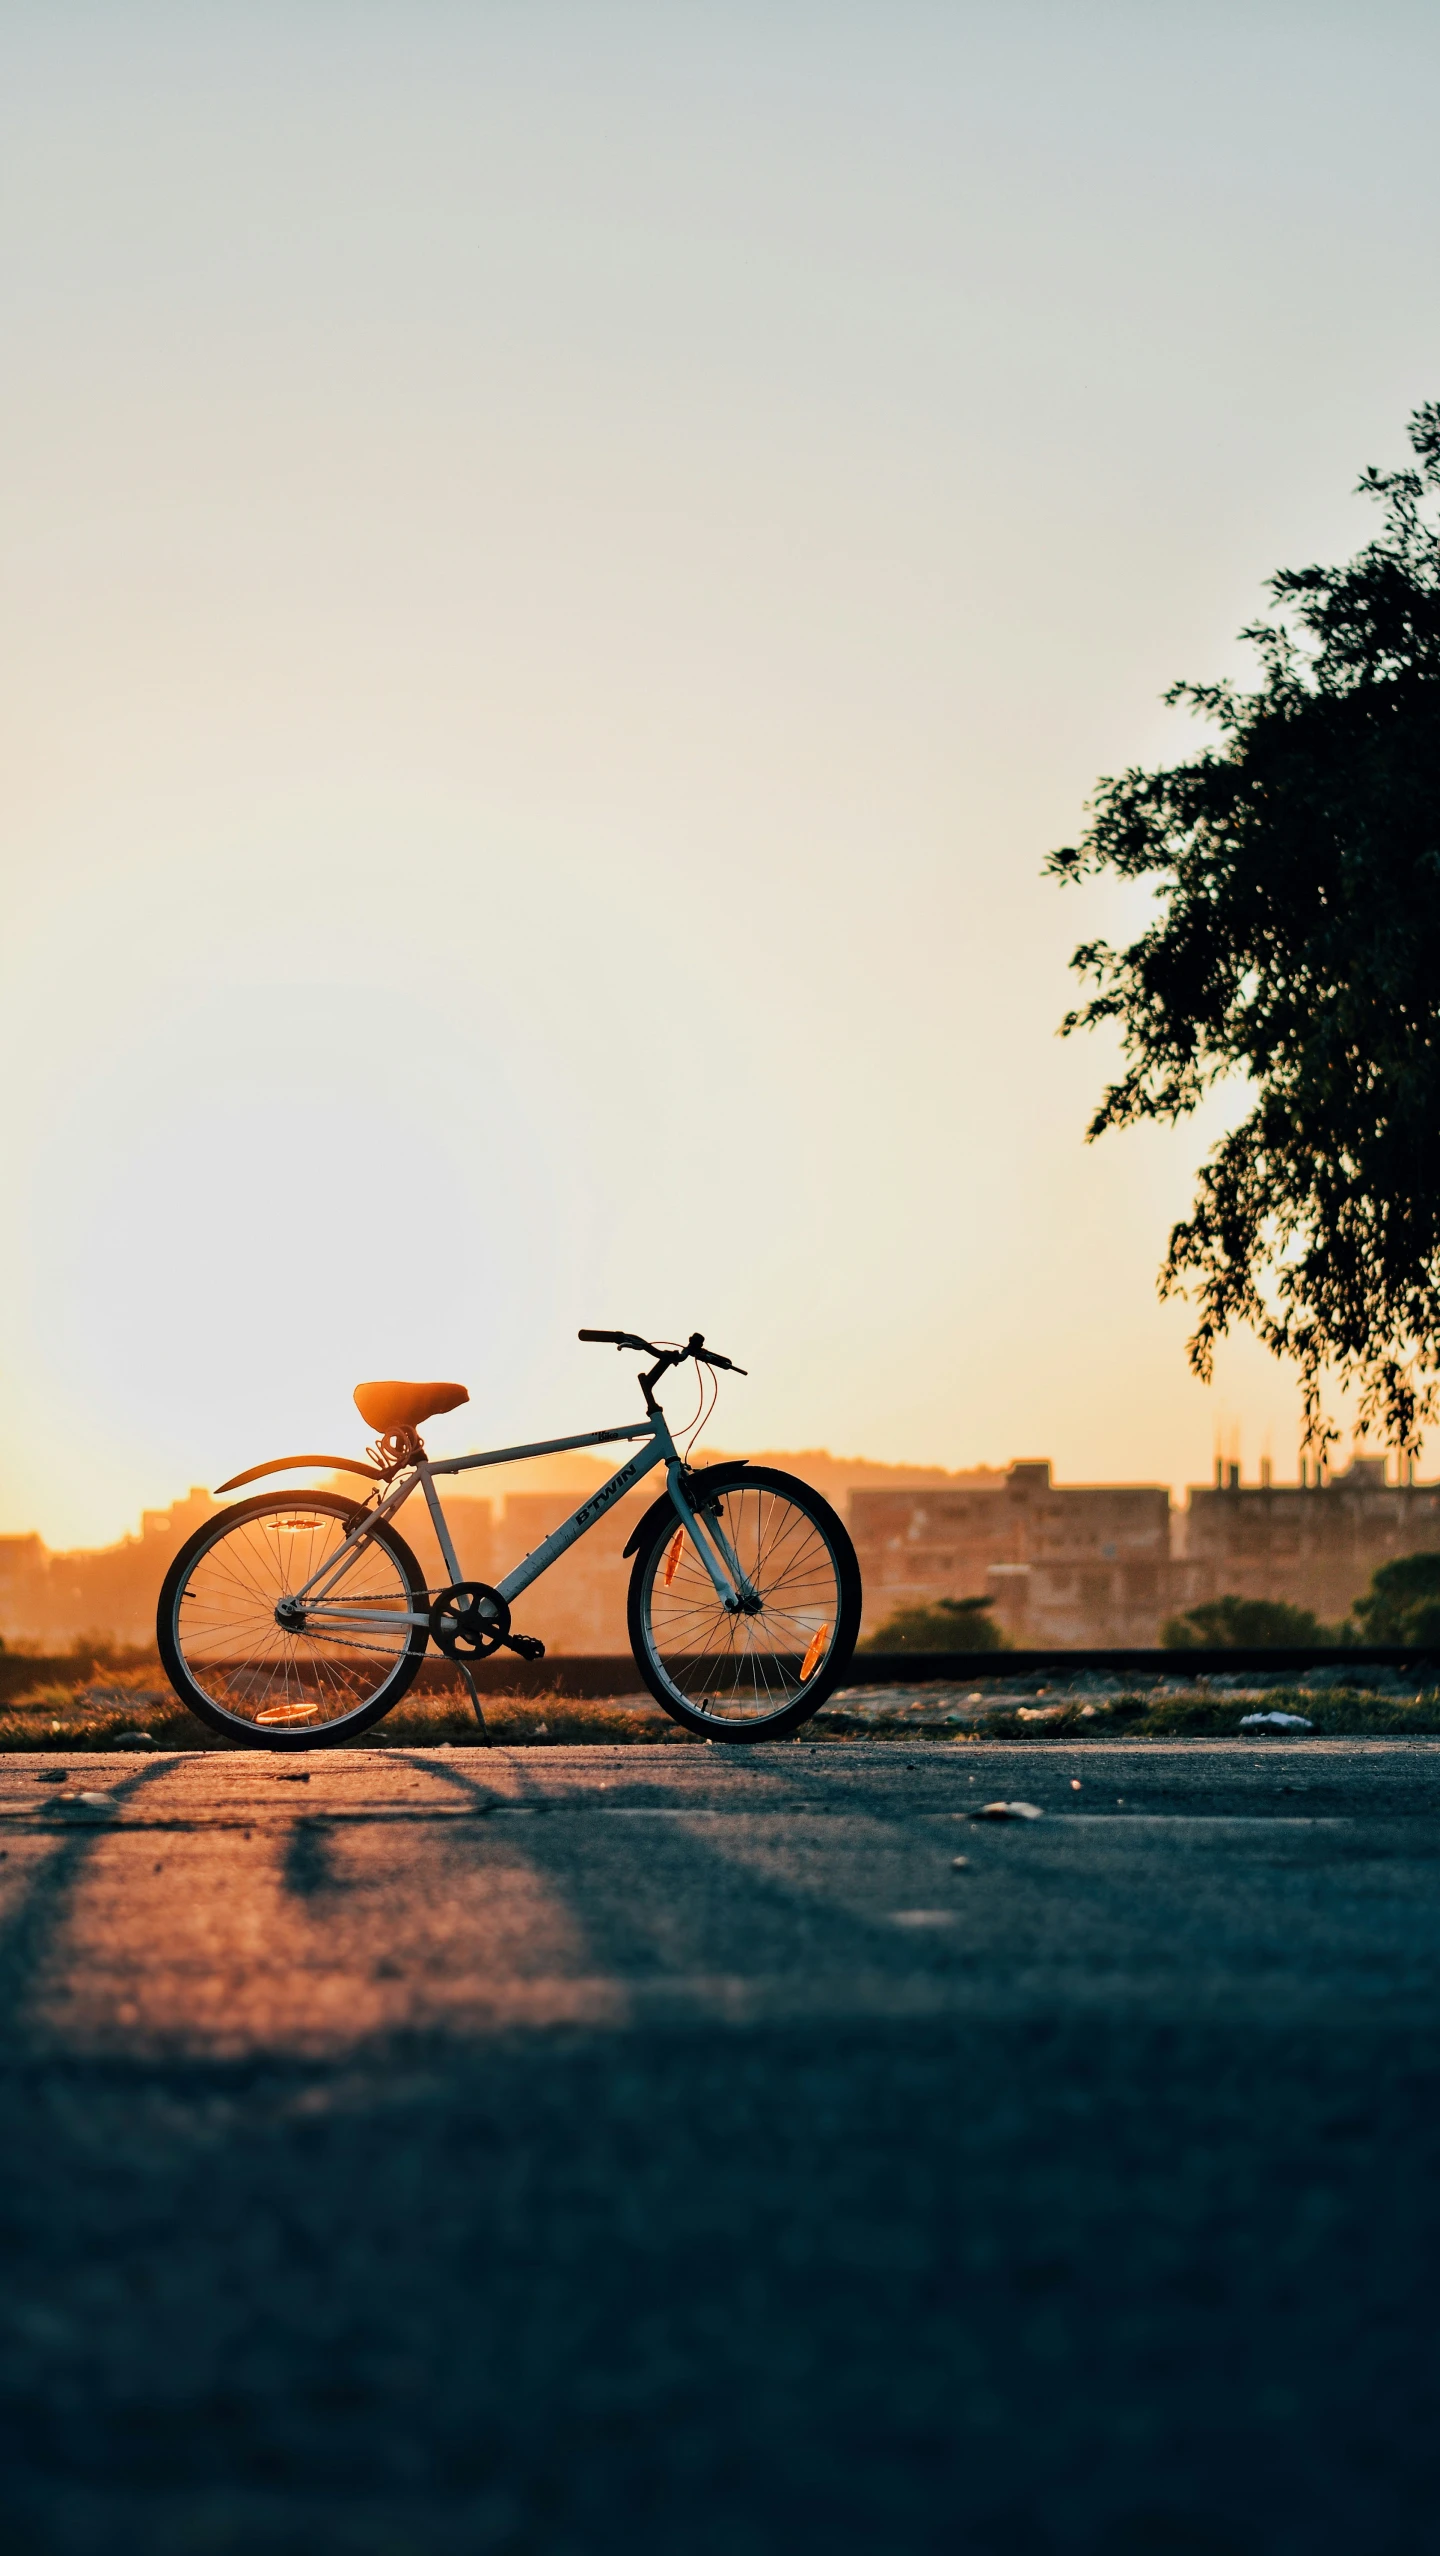 bike parked on the side of road in the sunset